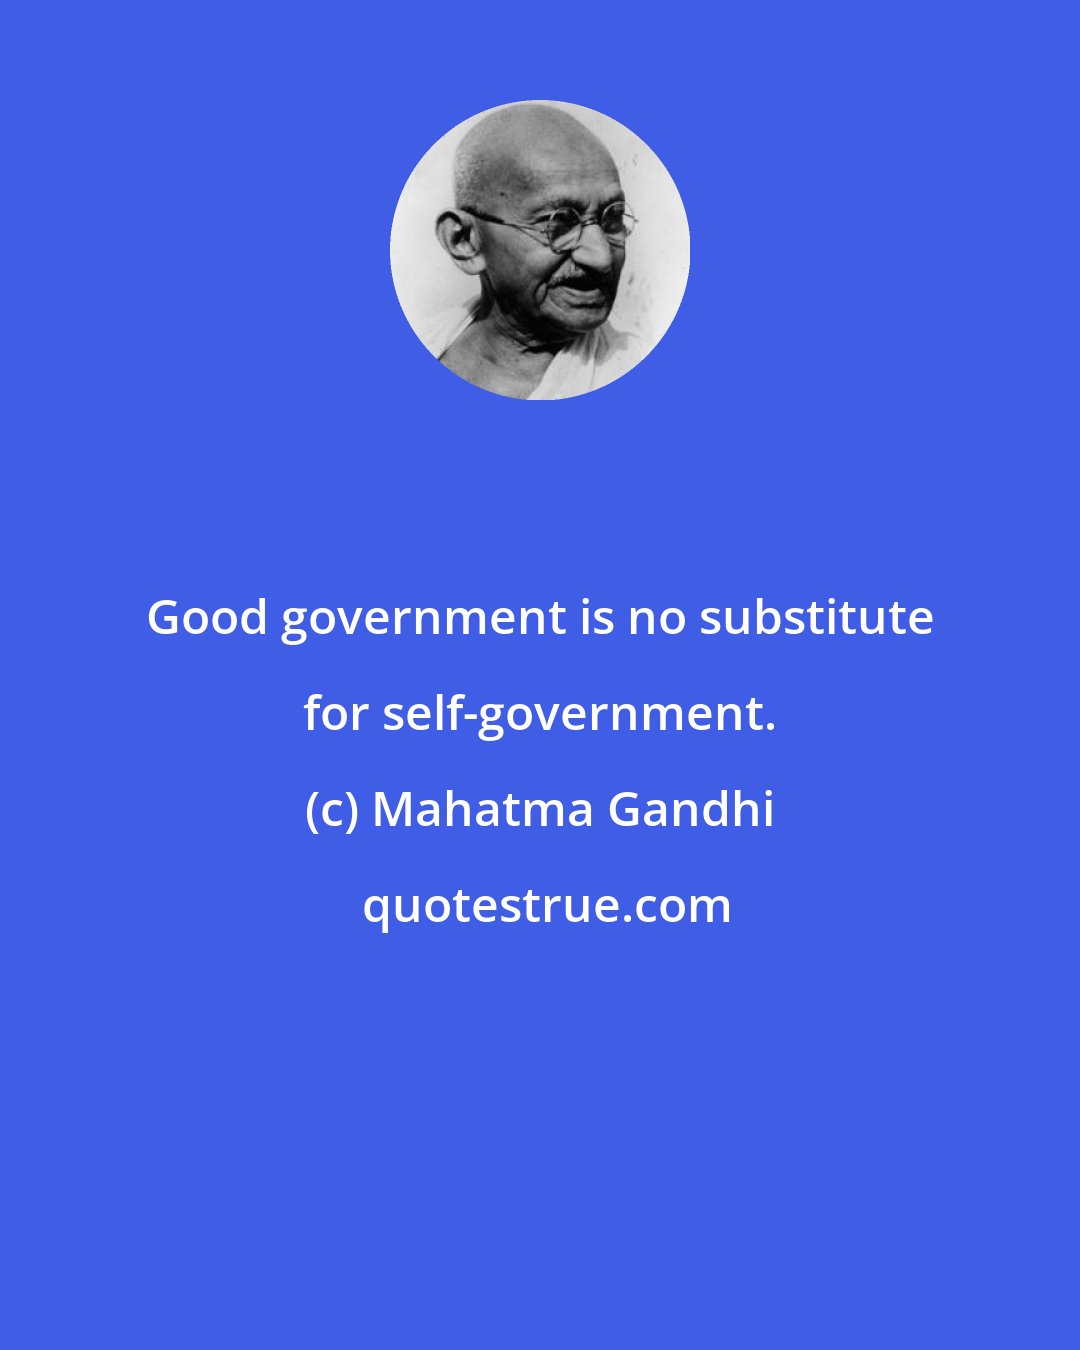 Mahatma Gandhi: Good government is no substitute for self-government.